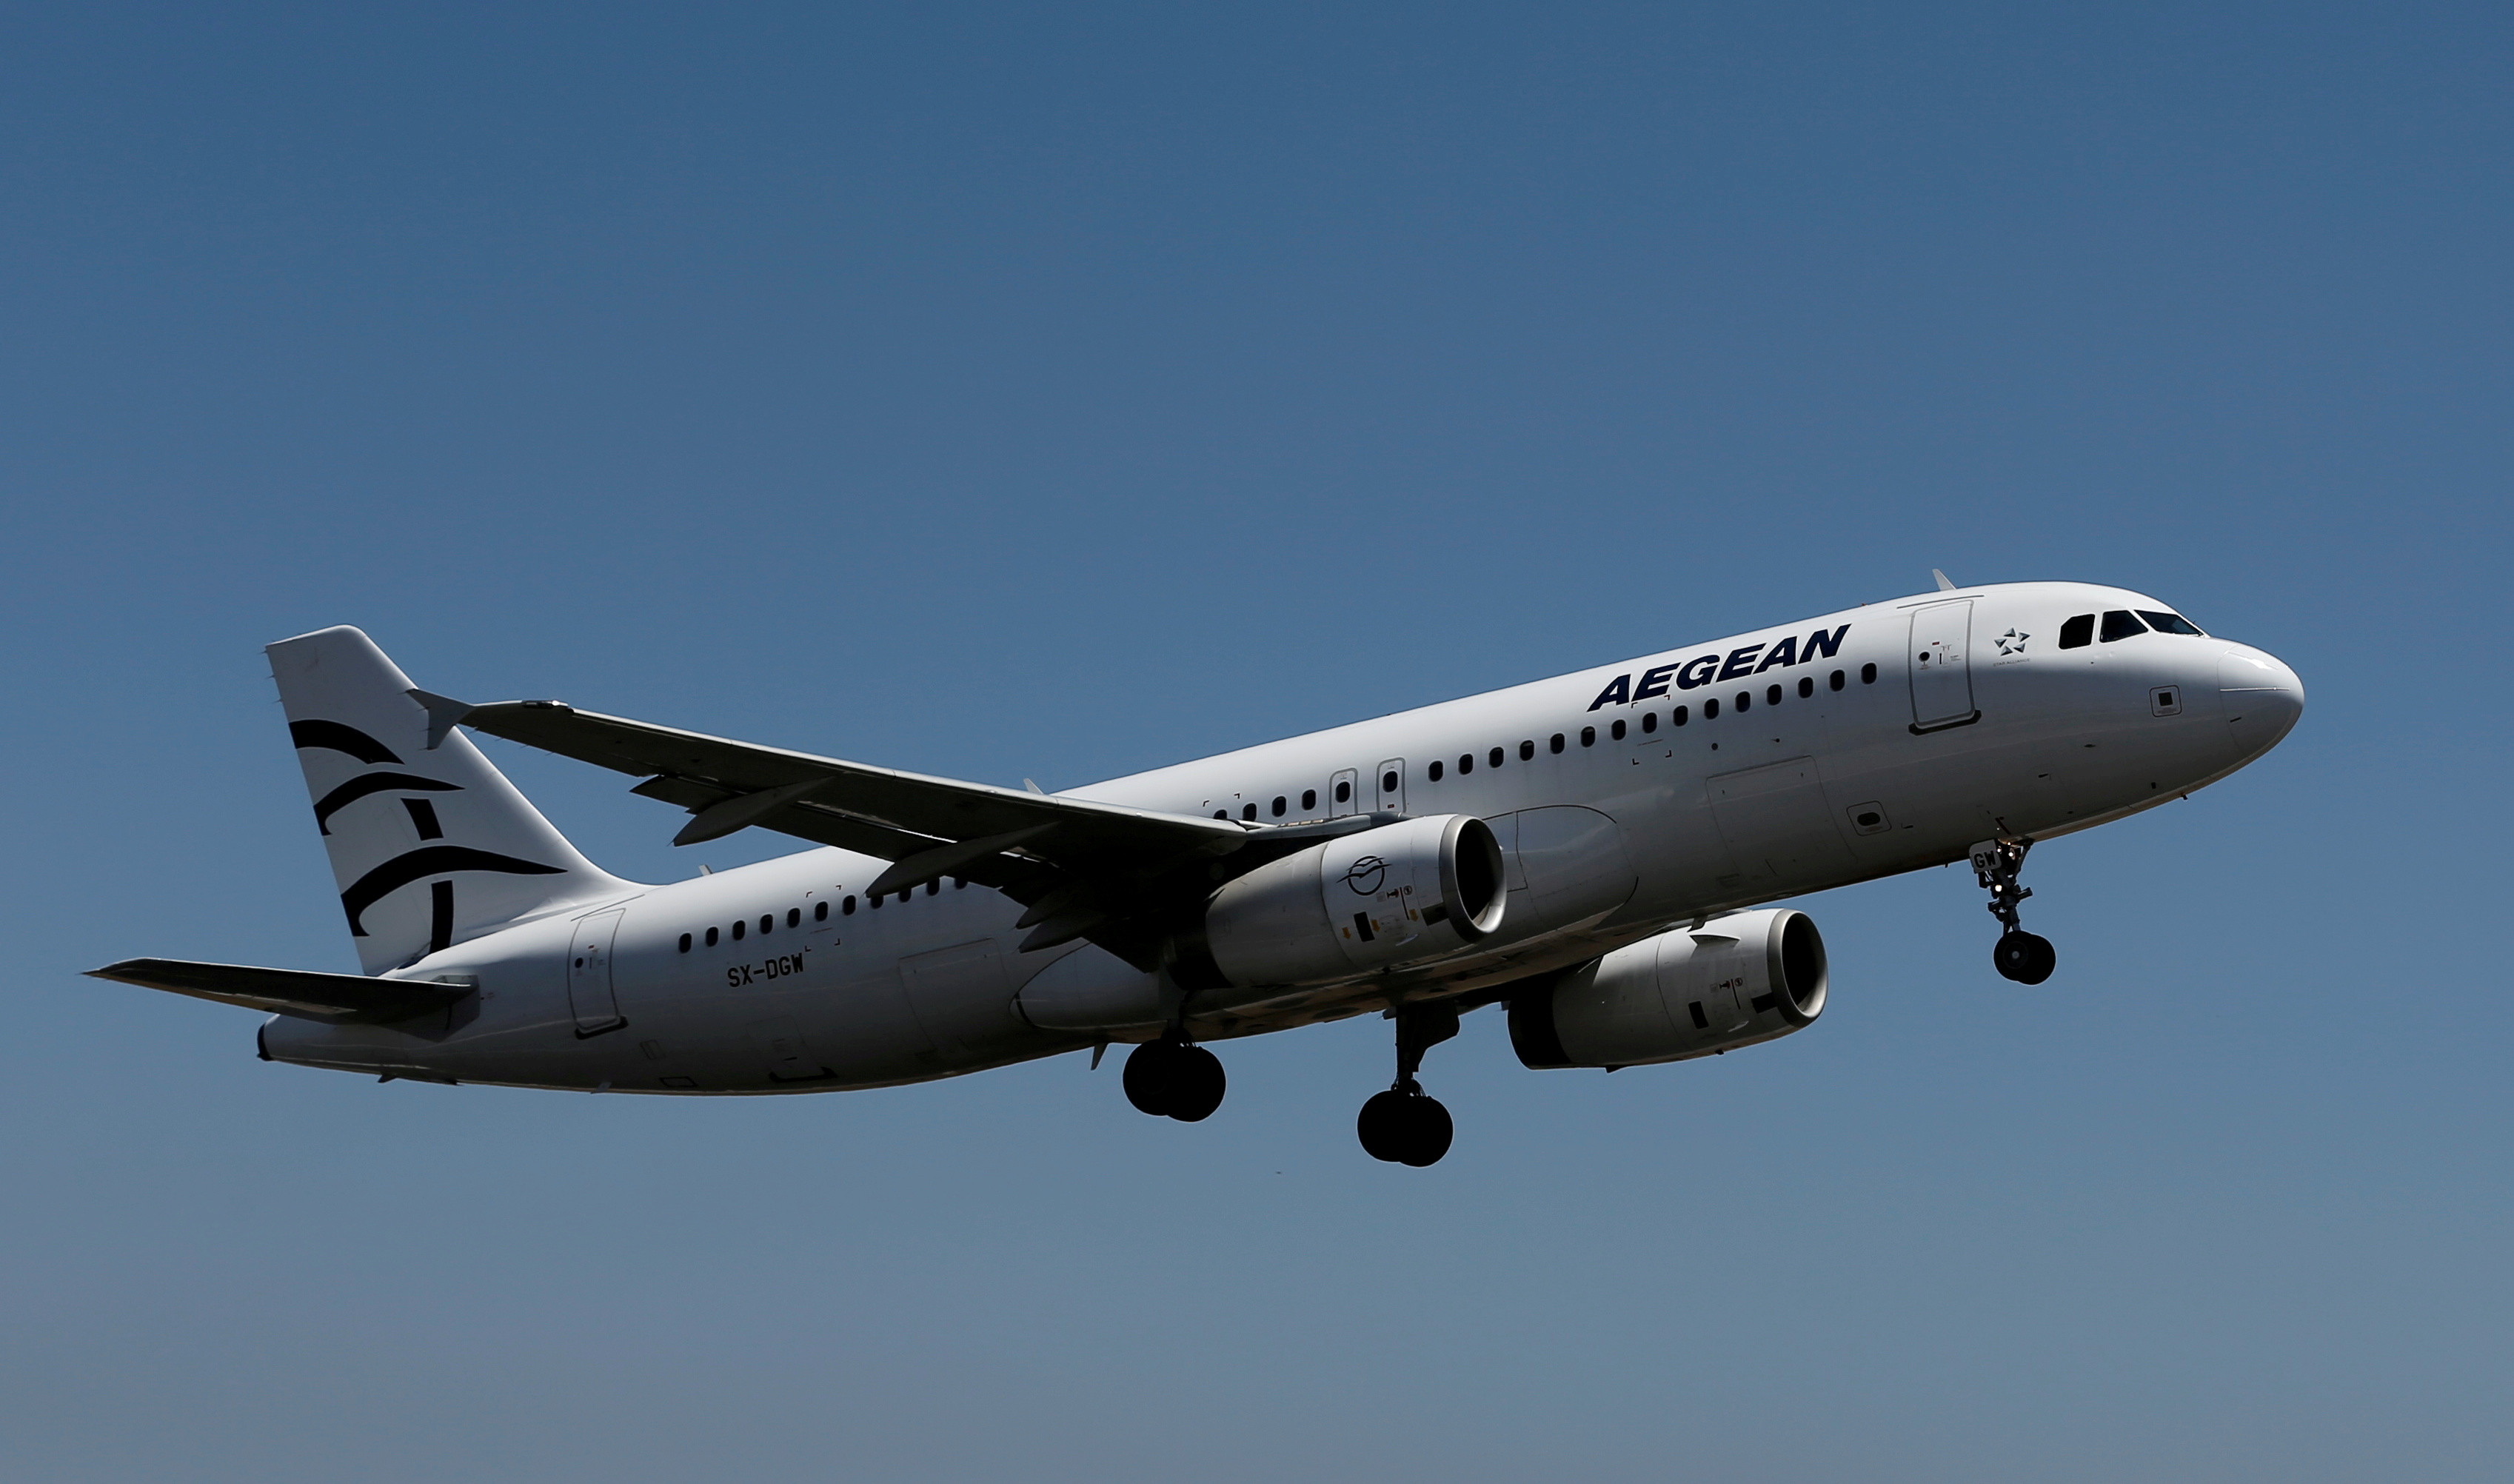 An Aegean Airlines Airbus A320 aircraft takes off from the Eleftherios Venizelos International Airport in Athens